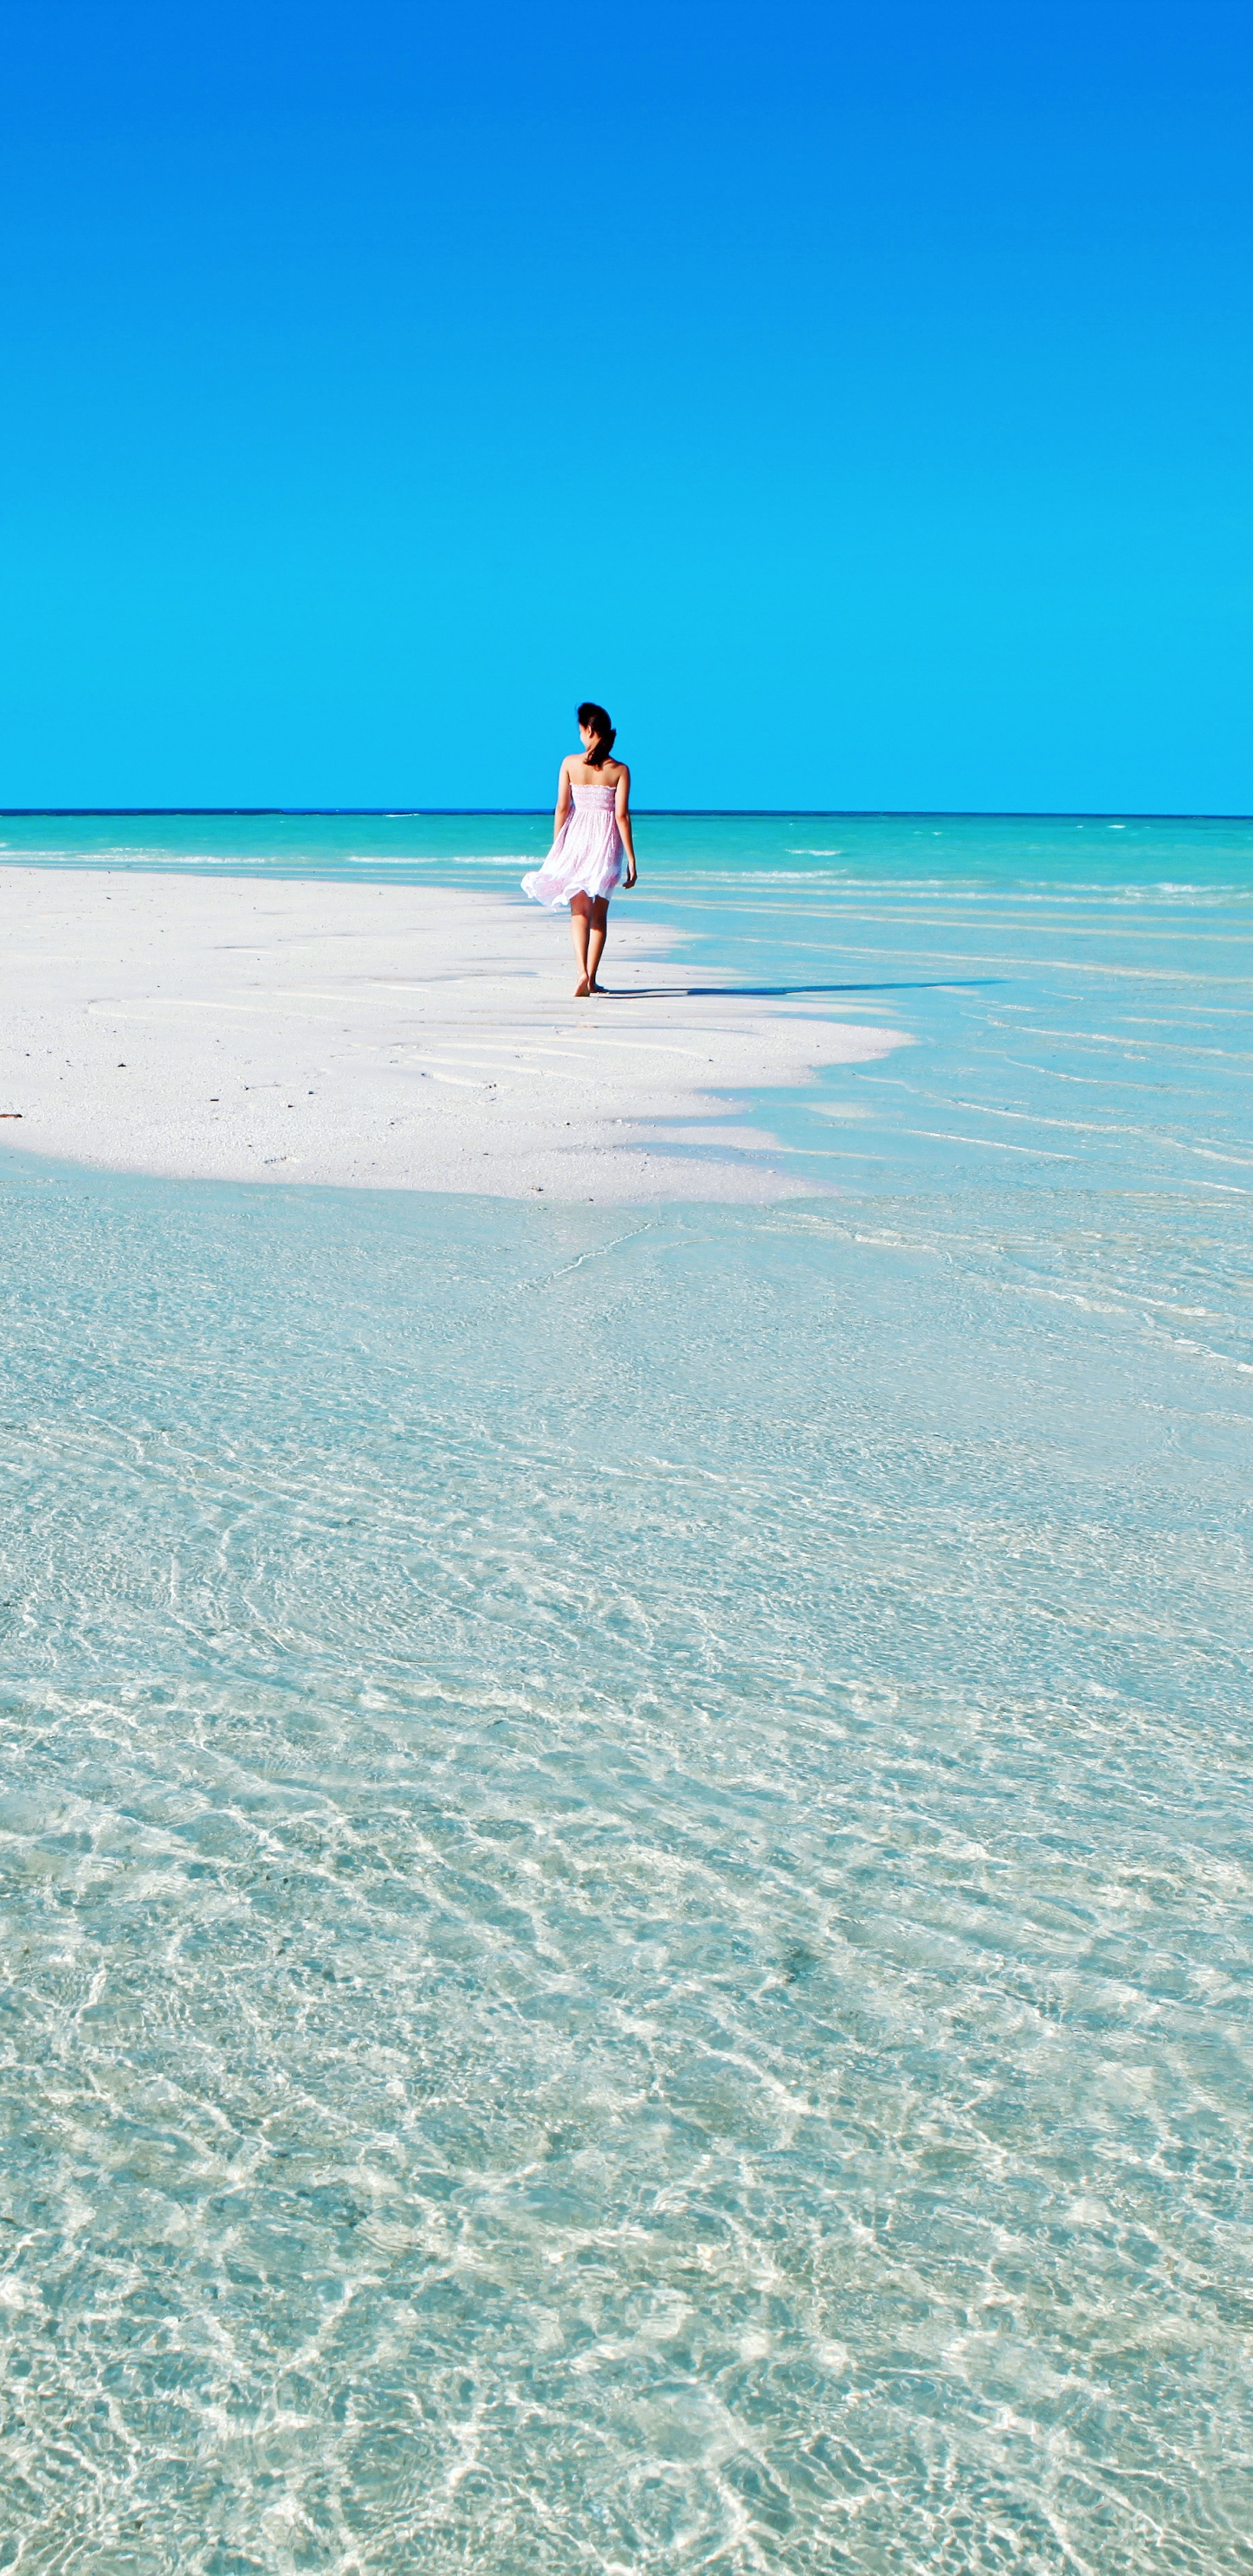 Woman in White Shirt Walking on Beach During Daytime. Wallpaper in 1440x2960 Resolution